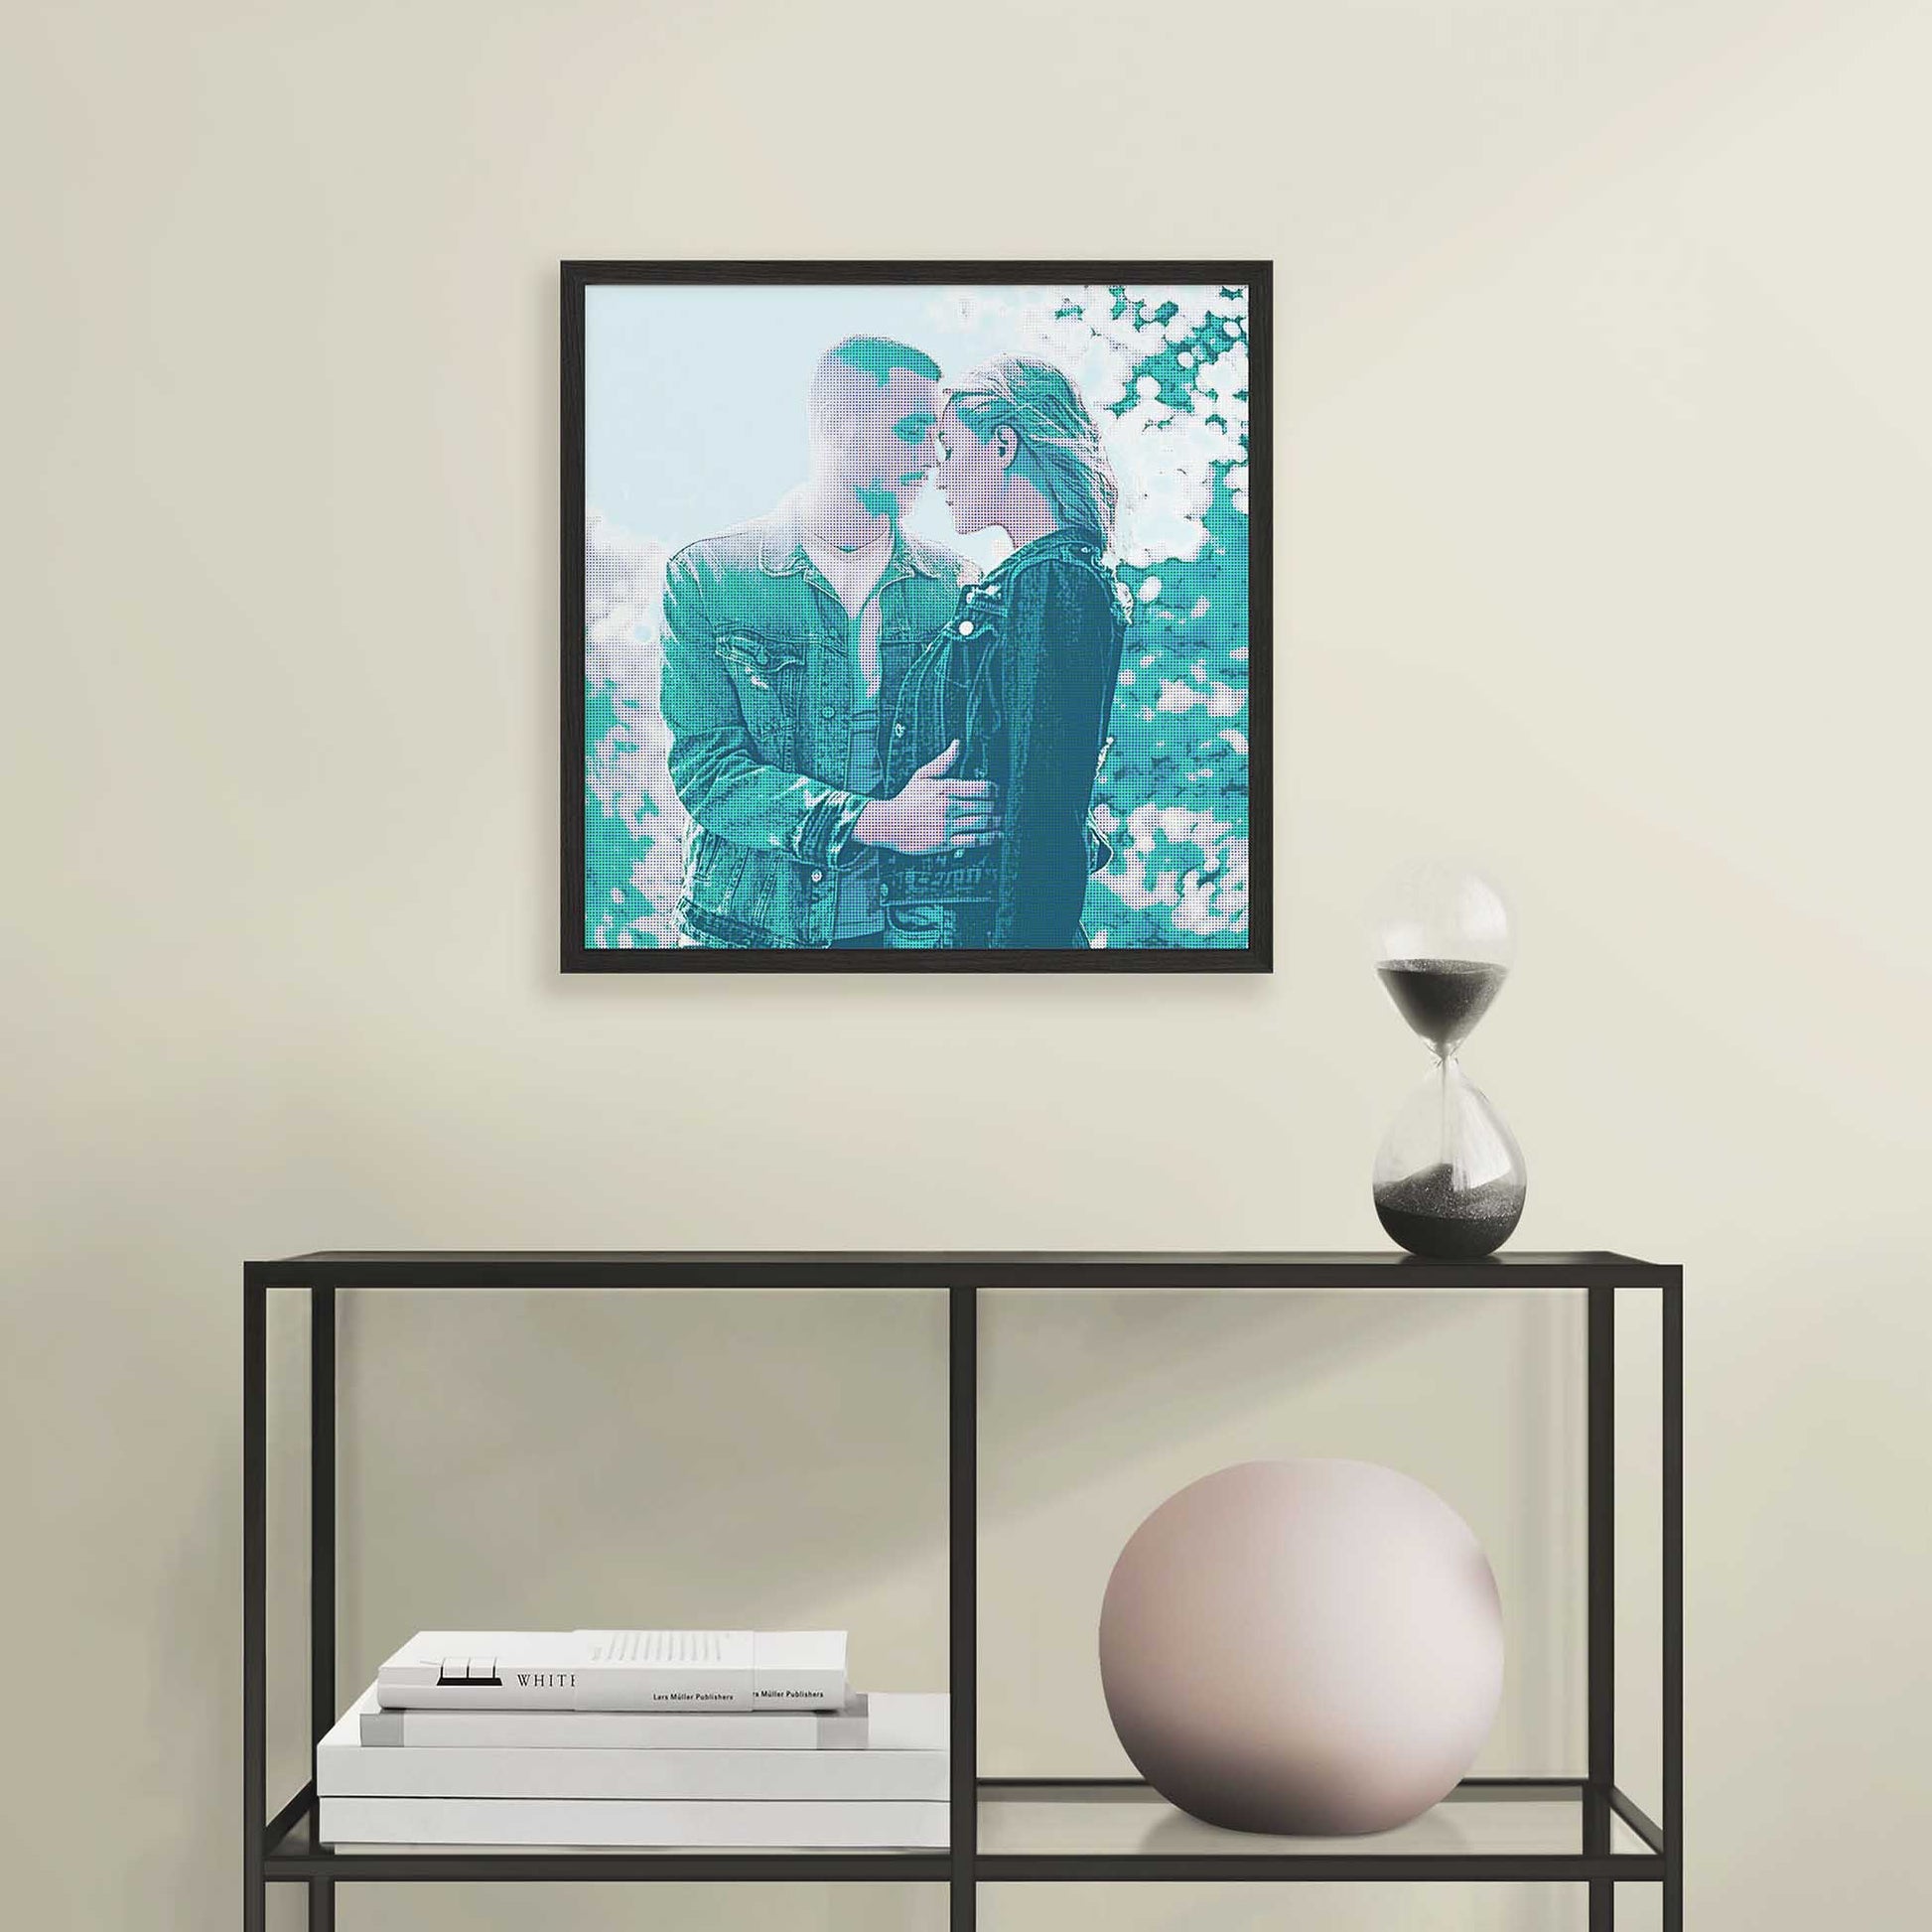 Create an artful atmosphere with the Personalised Teal Grunge Framed Print. Its halftone effect and old-school retro style bring a fresh and cool aesthetic to your home decor, unique and original print from photo 